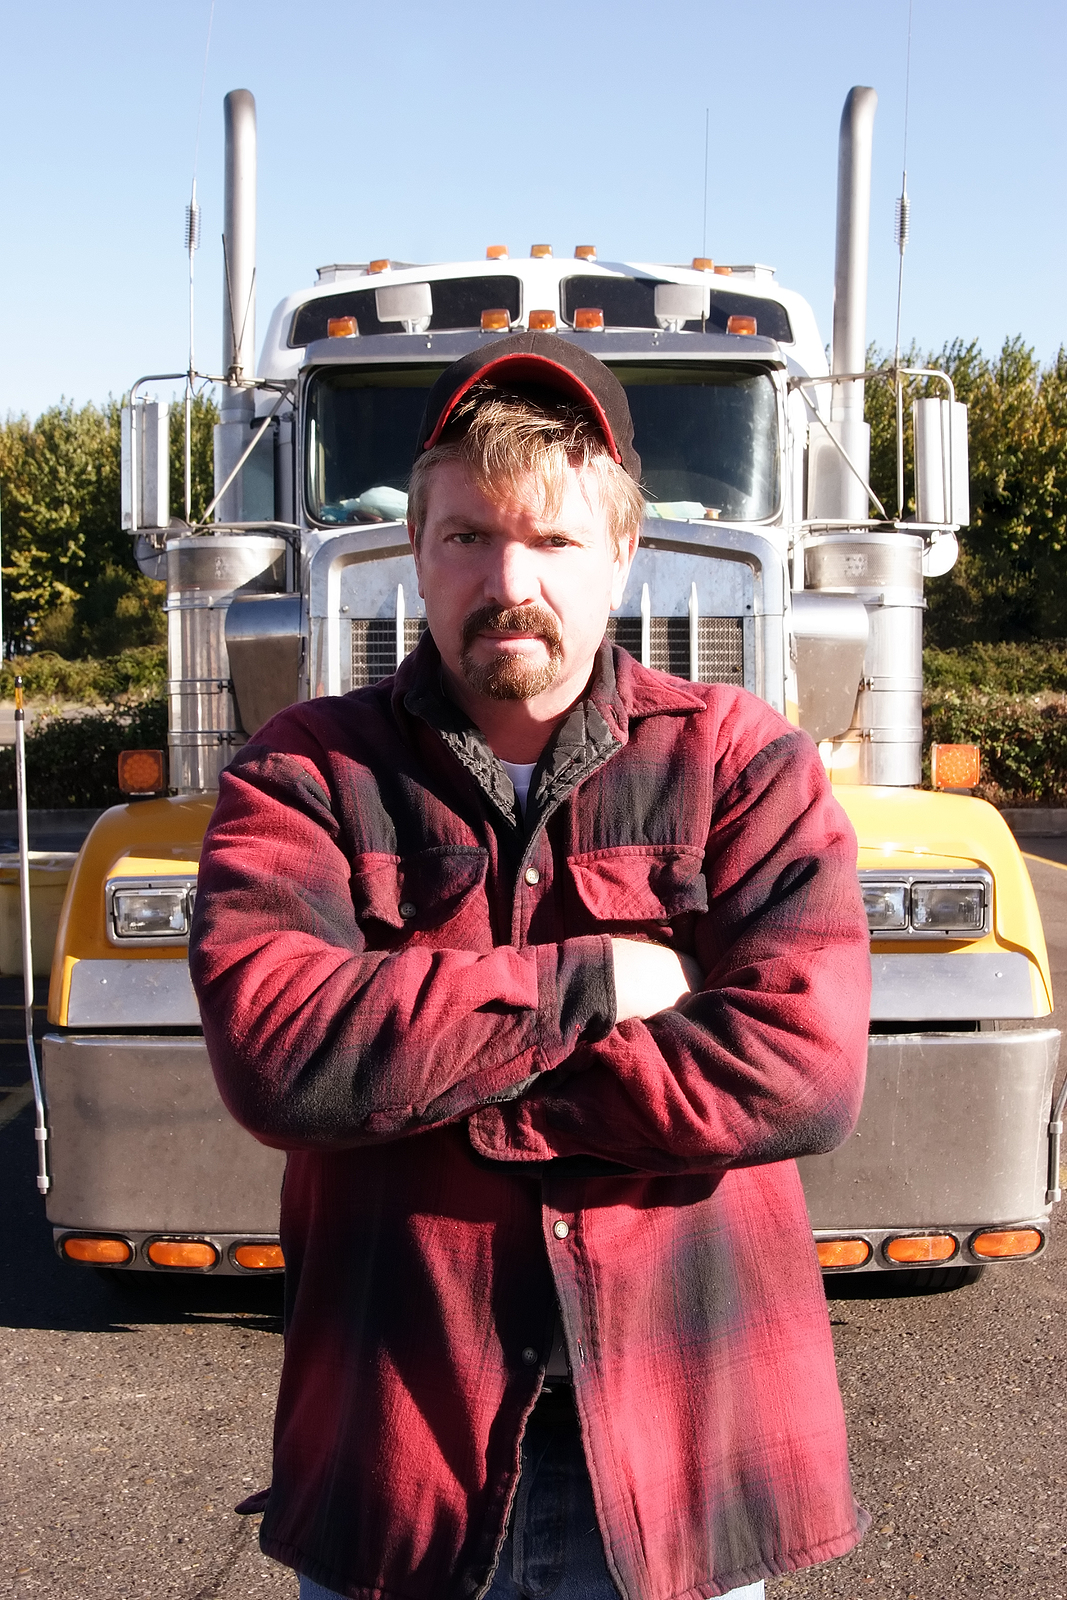 Semi truck driver posing with arms crossed in front of truck